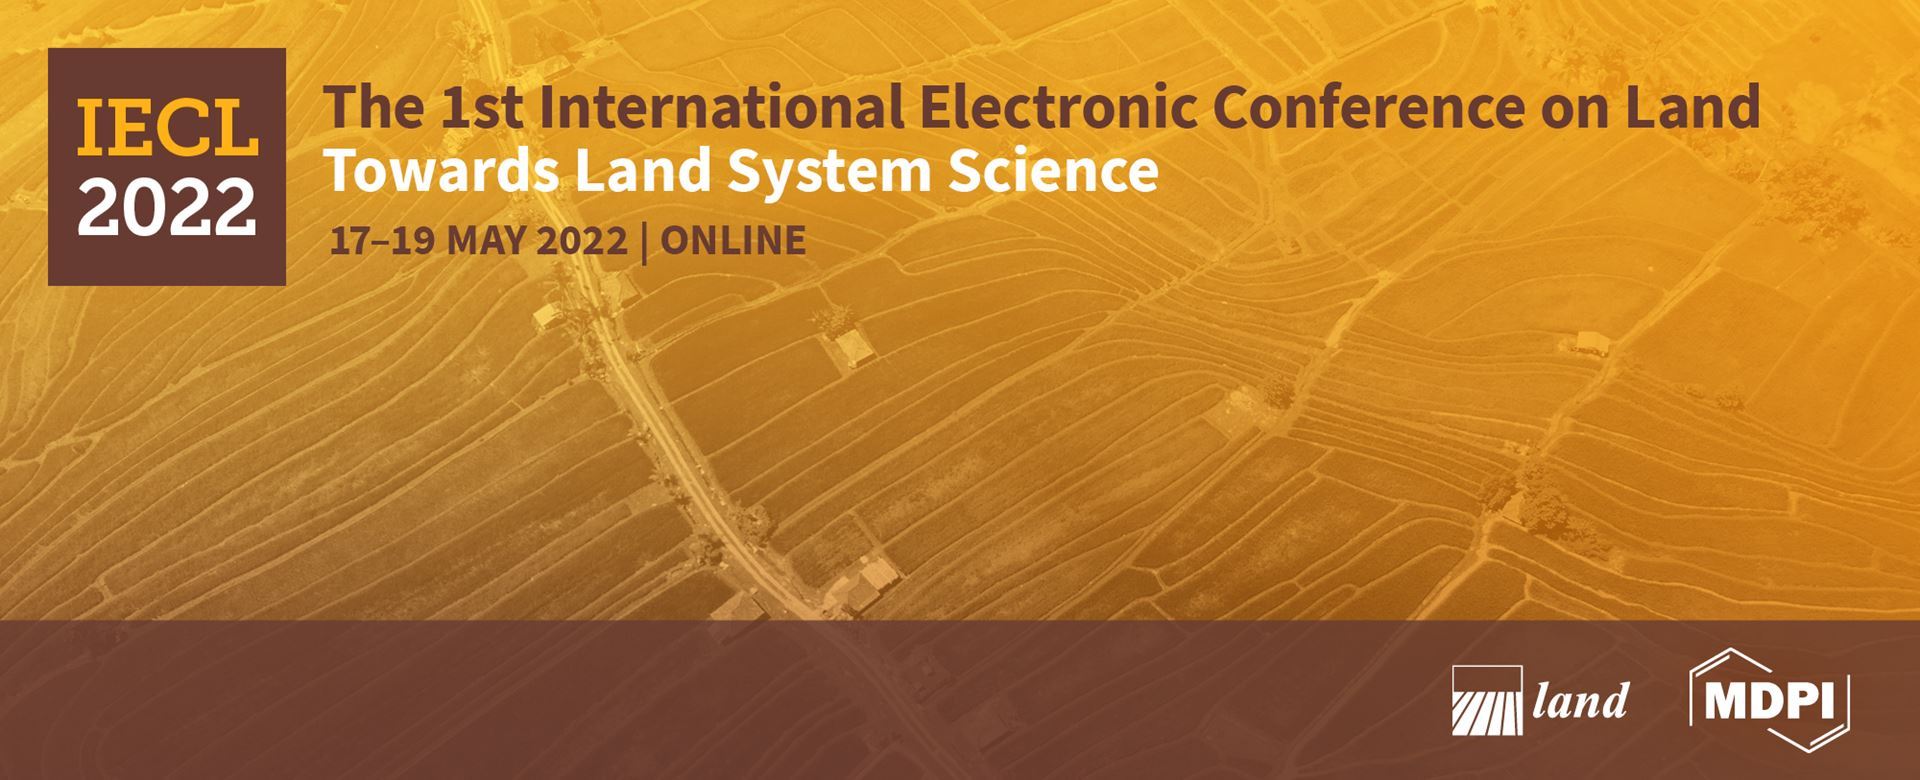 IECL 2022: 1st International Electronic Conference on Land